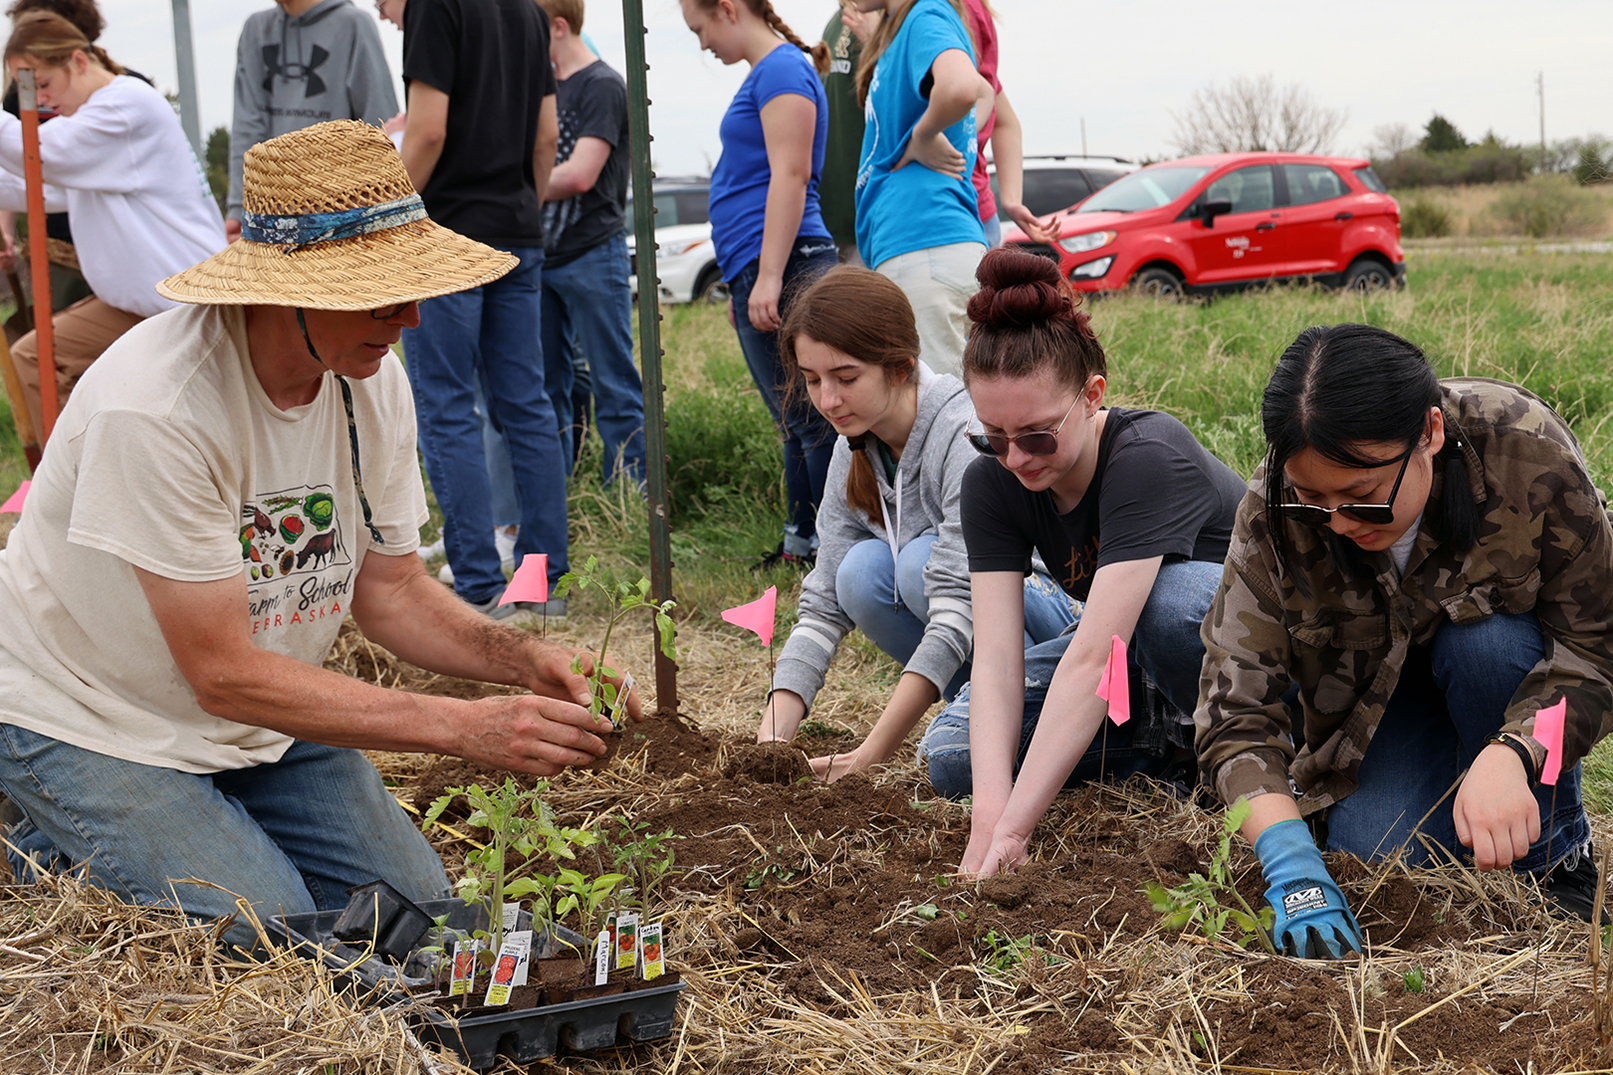 Gary Fehr, owner of Green School Farms in Raymond, shows students from Pius X High School how to plant tomatoes.